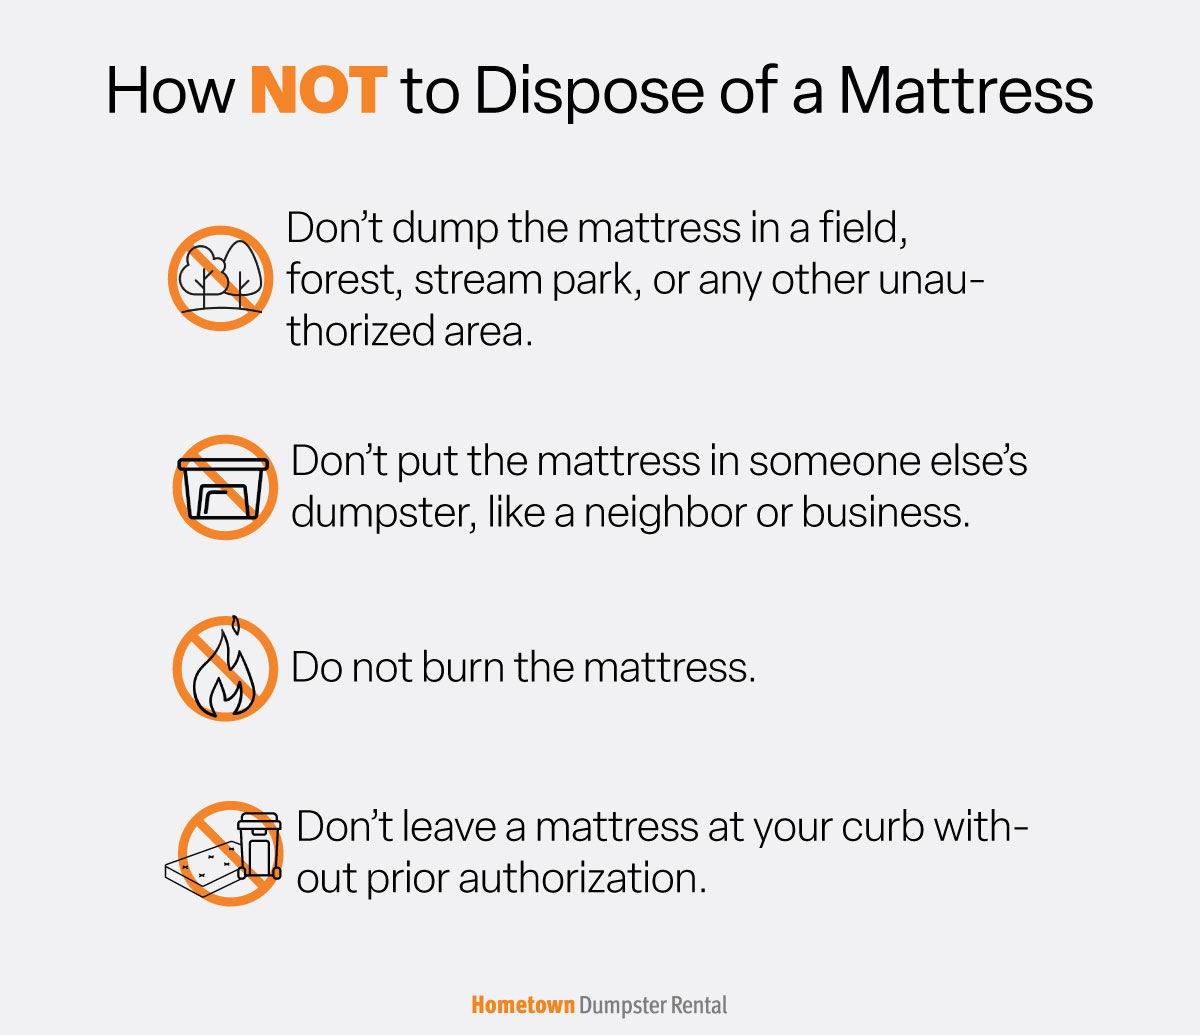 how not to dispose of a mattress infographic